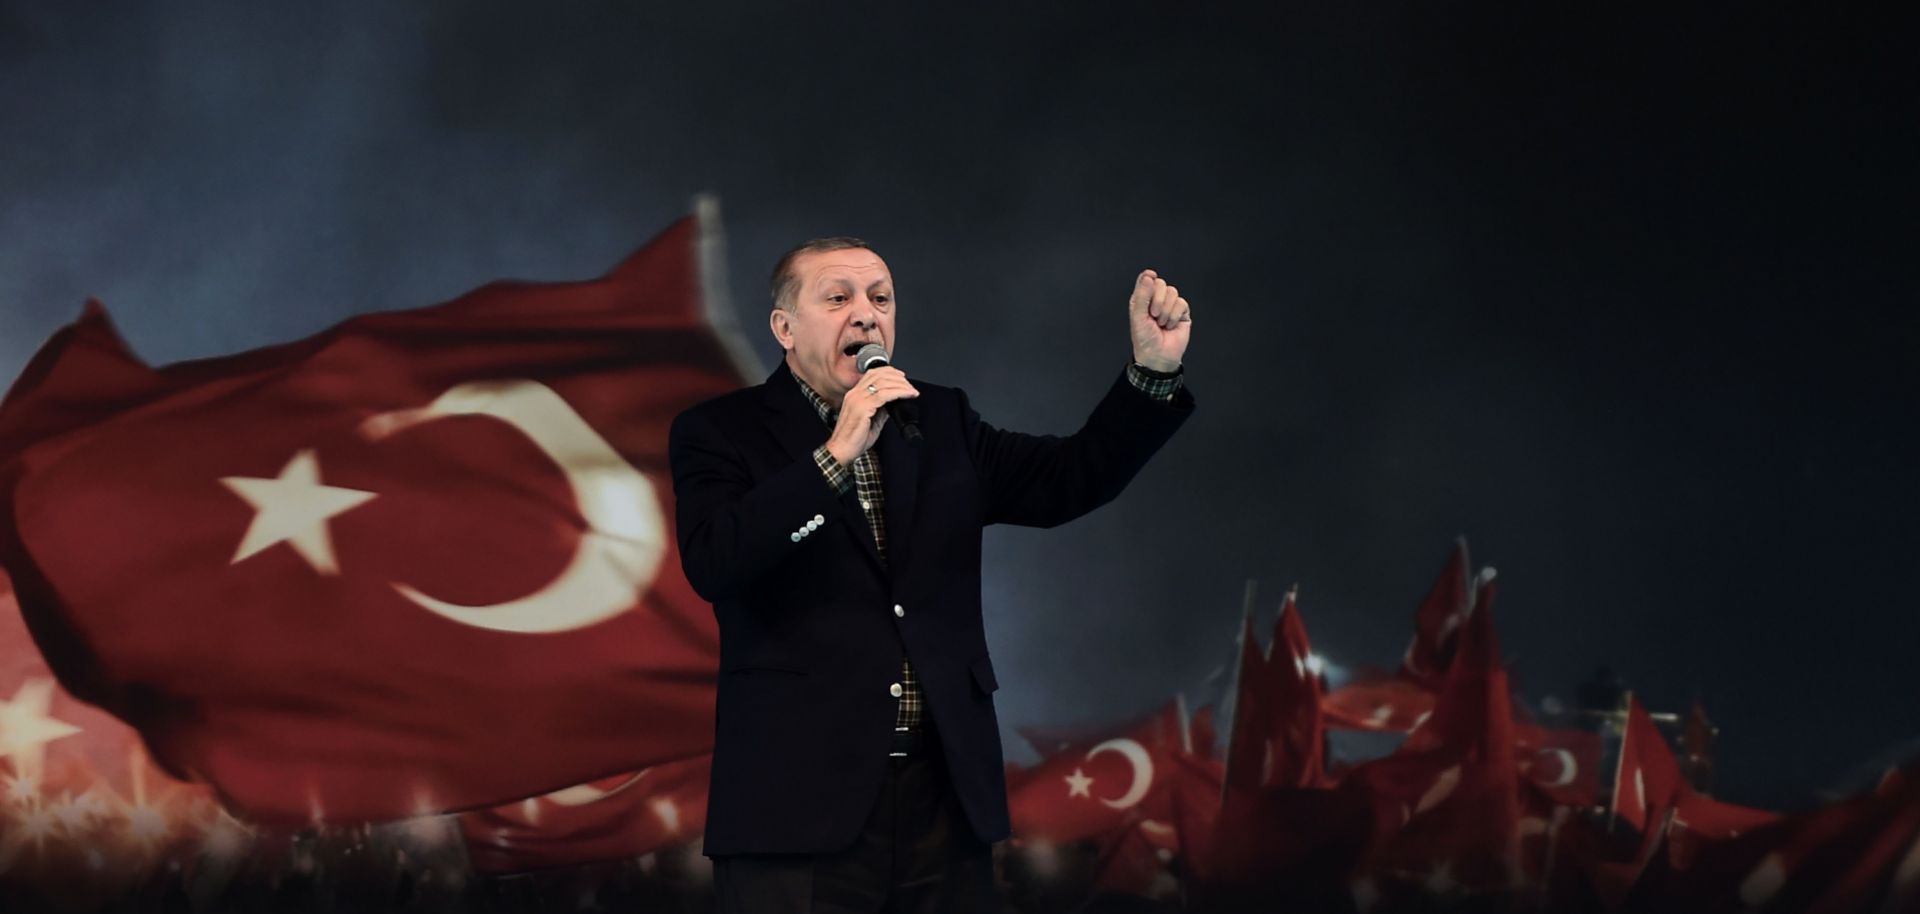 Turkish President Recep Tayyip Erdogan gives a speech at a rally in Istanbul in 2017.